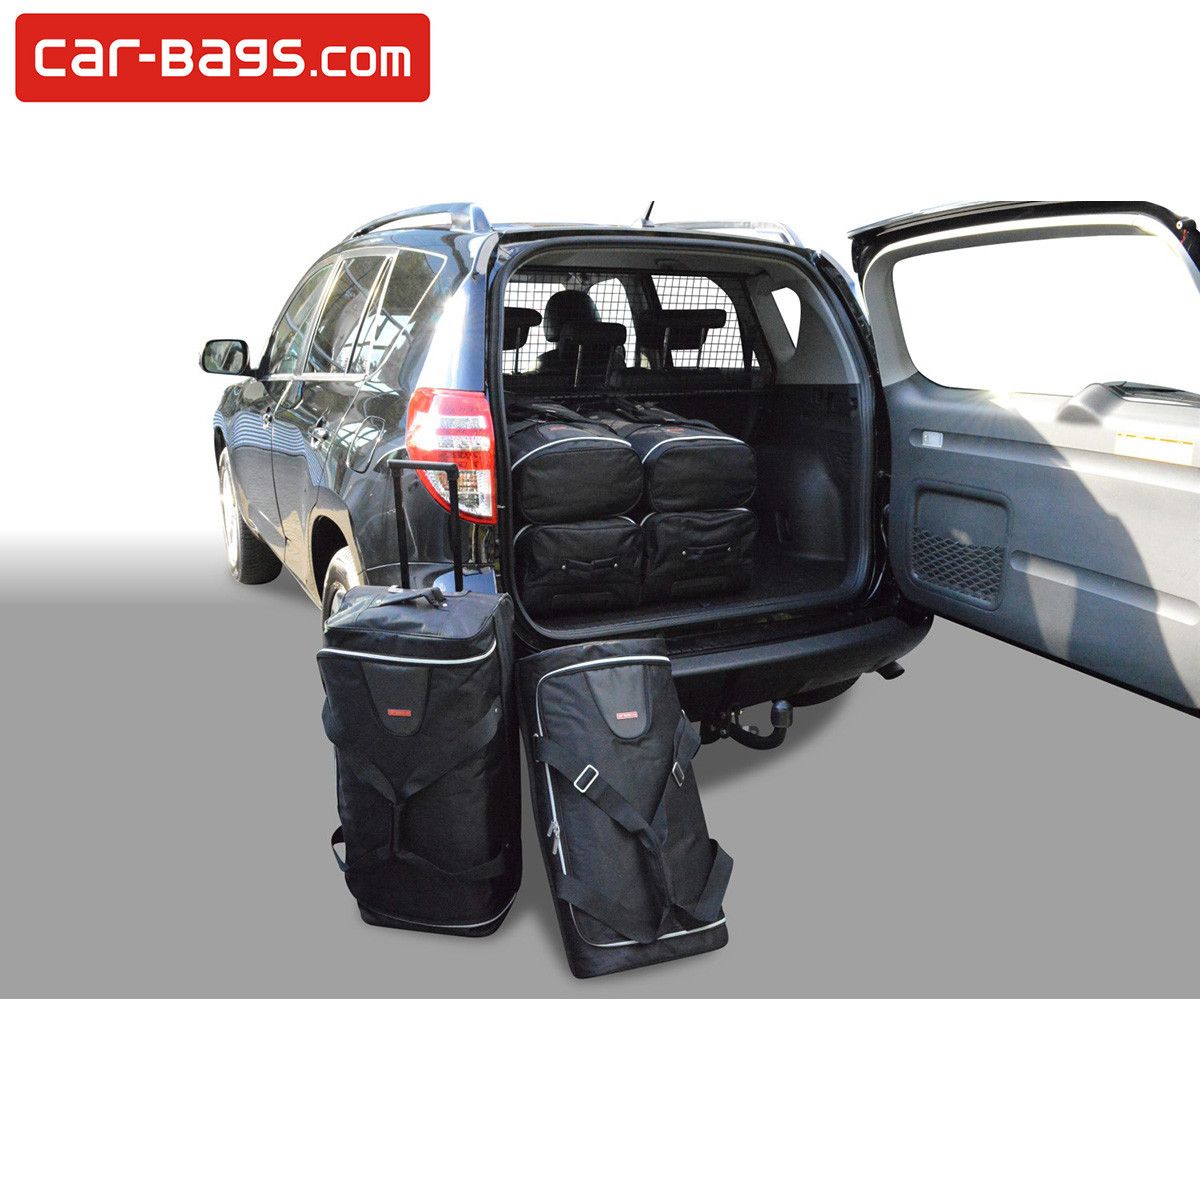 Travel bags fits Toyota and III made Car car | covers saving space Shop Bags fit Covers pcs) Perfect 379 for | (6 (XA30) tailor $ RAV4 Time | for